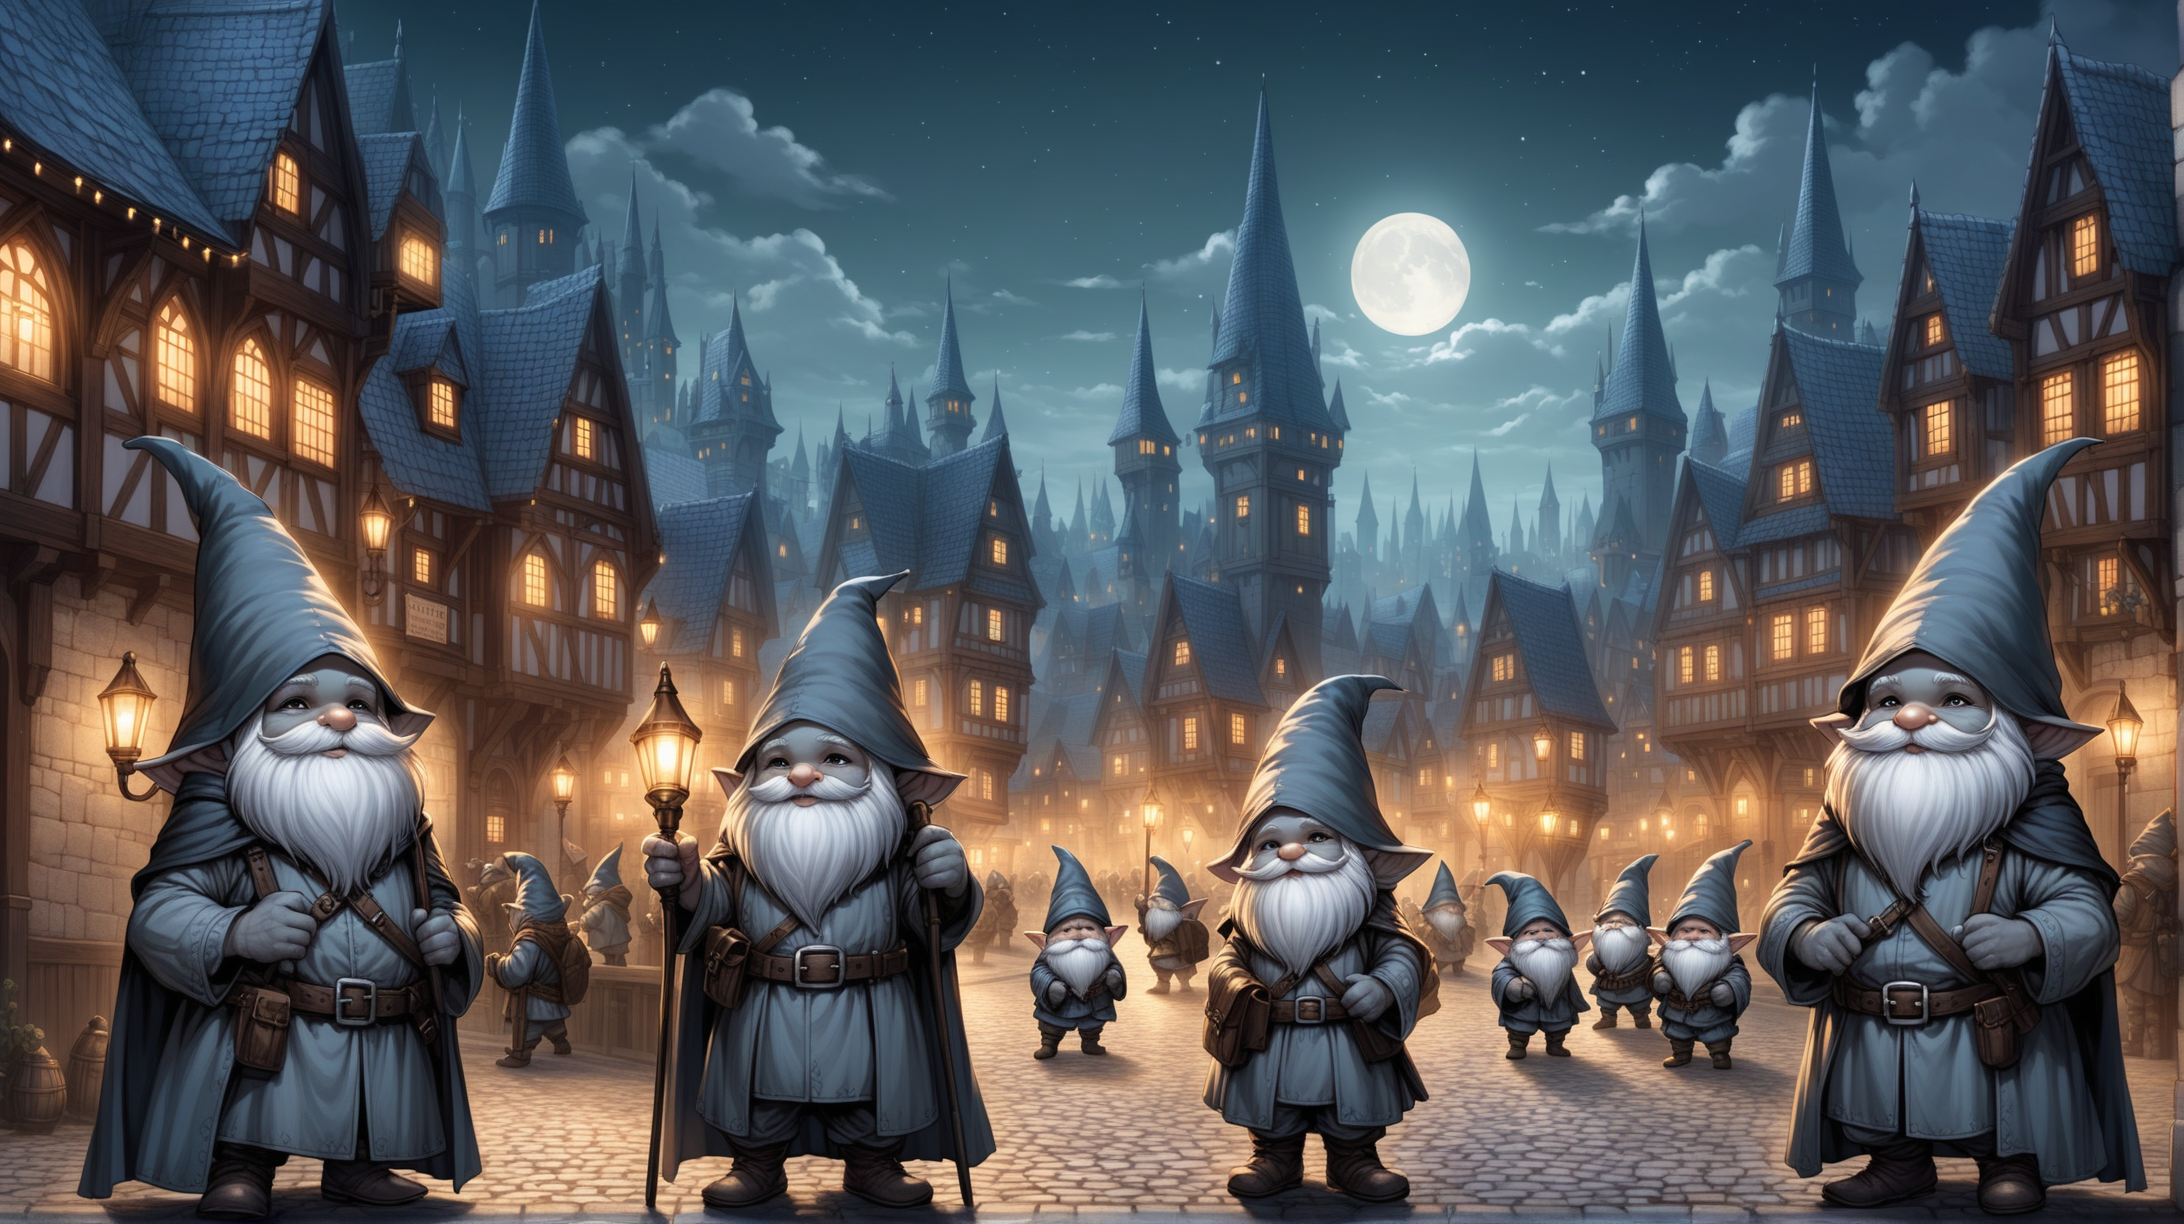 young gray gnomes with gray skin, gray gnome men with gray skin, Victorian city, night, Medieval fantasy